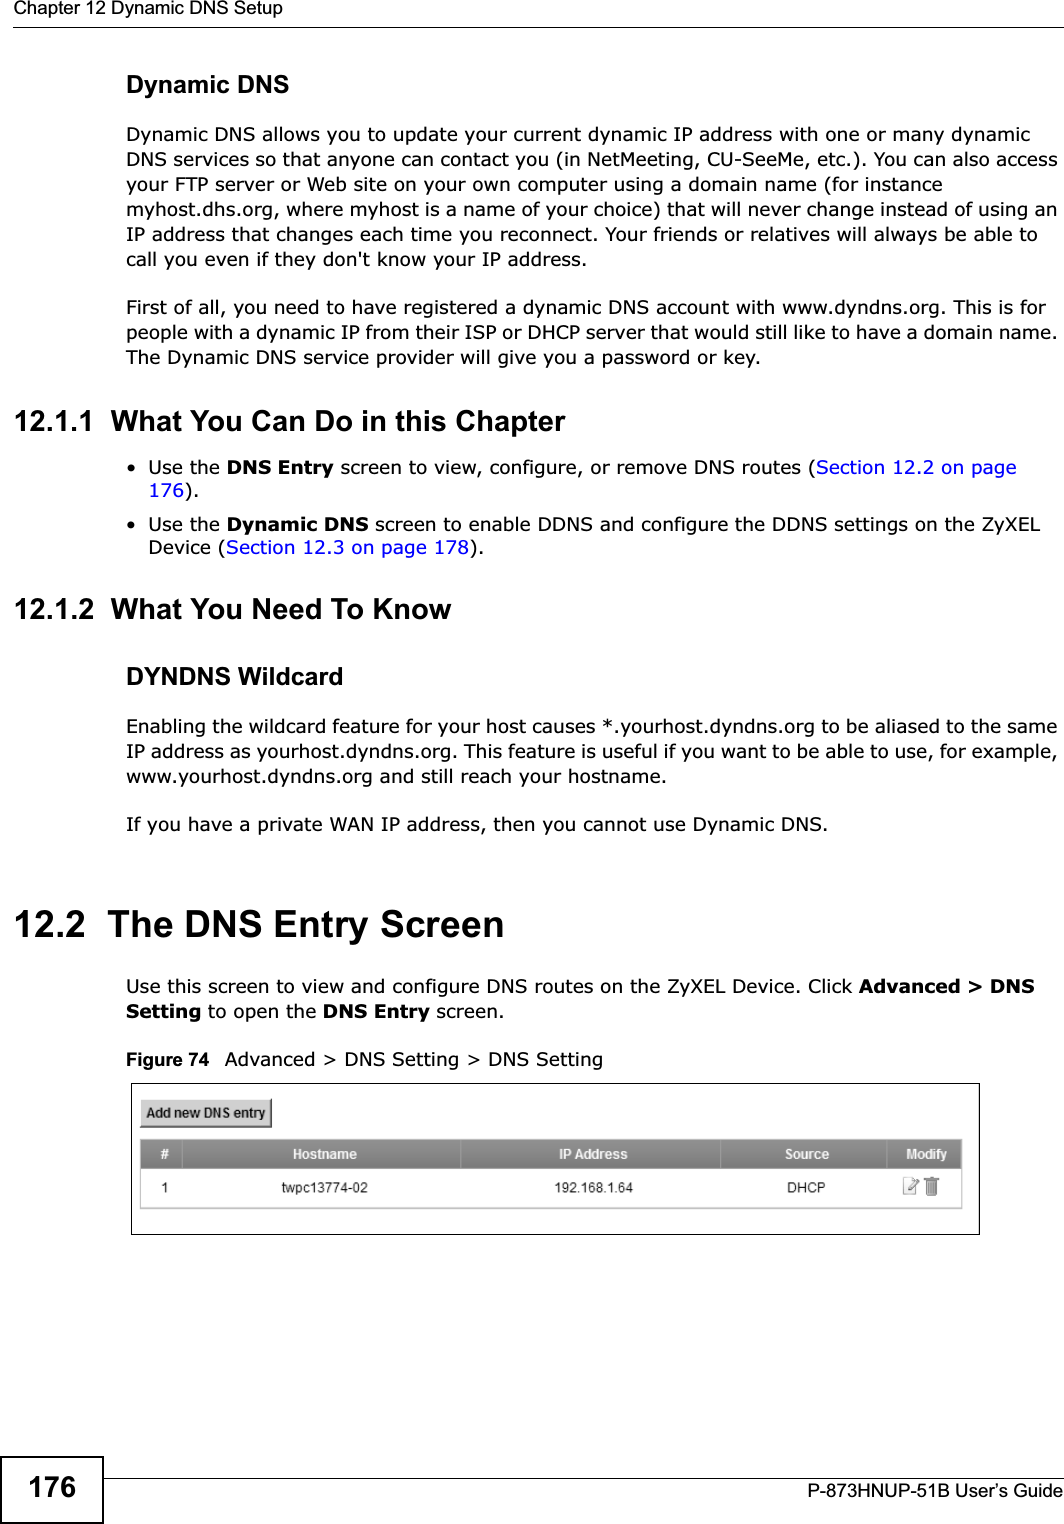 Chapter 12 Dynamic DNS SetupP-873HNUP-51B User’s Guide176Dynamic DNSDynamic DNS allows you to update your current dynamic IP address with one or many dynamic DNS services so that anyone can contact you (in NetMeeting, CU-SeeMe, etc.). You can also access your FTP server or Web site on your own computer using a domain name (for instance myhost.dhs.org, where myhost is a name of your choice) that will never change instead of using an IP address that changes each time you reconnect. Your friends or relatives will always be able to call you even if they don&apos;t know your IP address.First of all, you need to have registered a dynamic DNS account with www.dyndns.org. This is for people with a dynamic IP from their ISP or DHCP server that would still like to have a domain name. The Dynamic DNS service provider will give you a password or key. 12.1.1  What You Can Do in this Chapter•Use the DNS Entry screen to view, configure, or remove DNS routes (Section 12.2 on page 176).•Use the Dynamic DNS screen to enable DDNS and configure the DDNS settings on the ZyXEL Device (Section 12.3 on page 178).12.1.2  What You Need To KnowDYNDNS WildcardEnabling the wildcard feature for your host causes *.yourhost.dyndns.org to be aliased to the same IP address as yourhost.dyndns.org. This feature is useful if you want to be able to use, for example, www.yourhost.dyndns.org and still reach your hostname.If you have a private WAN IP address, then you cannot use Dynamic DNS.12.2  The DNS Entry ScreenUse this screen to view and configure DNS routes on the ZyXEL Device. Click Advanced &gt; DNS Setting to open the DNS Entry screen.Figure 74   Advanced &gt; DNS Setting &gt; DNS Setting